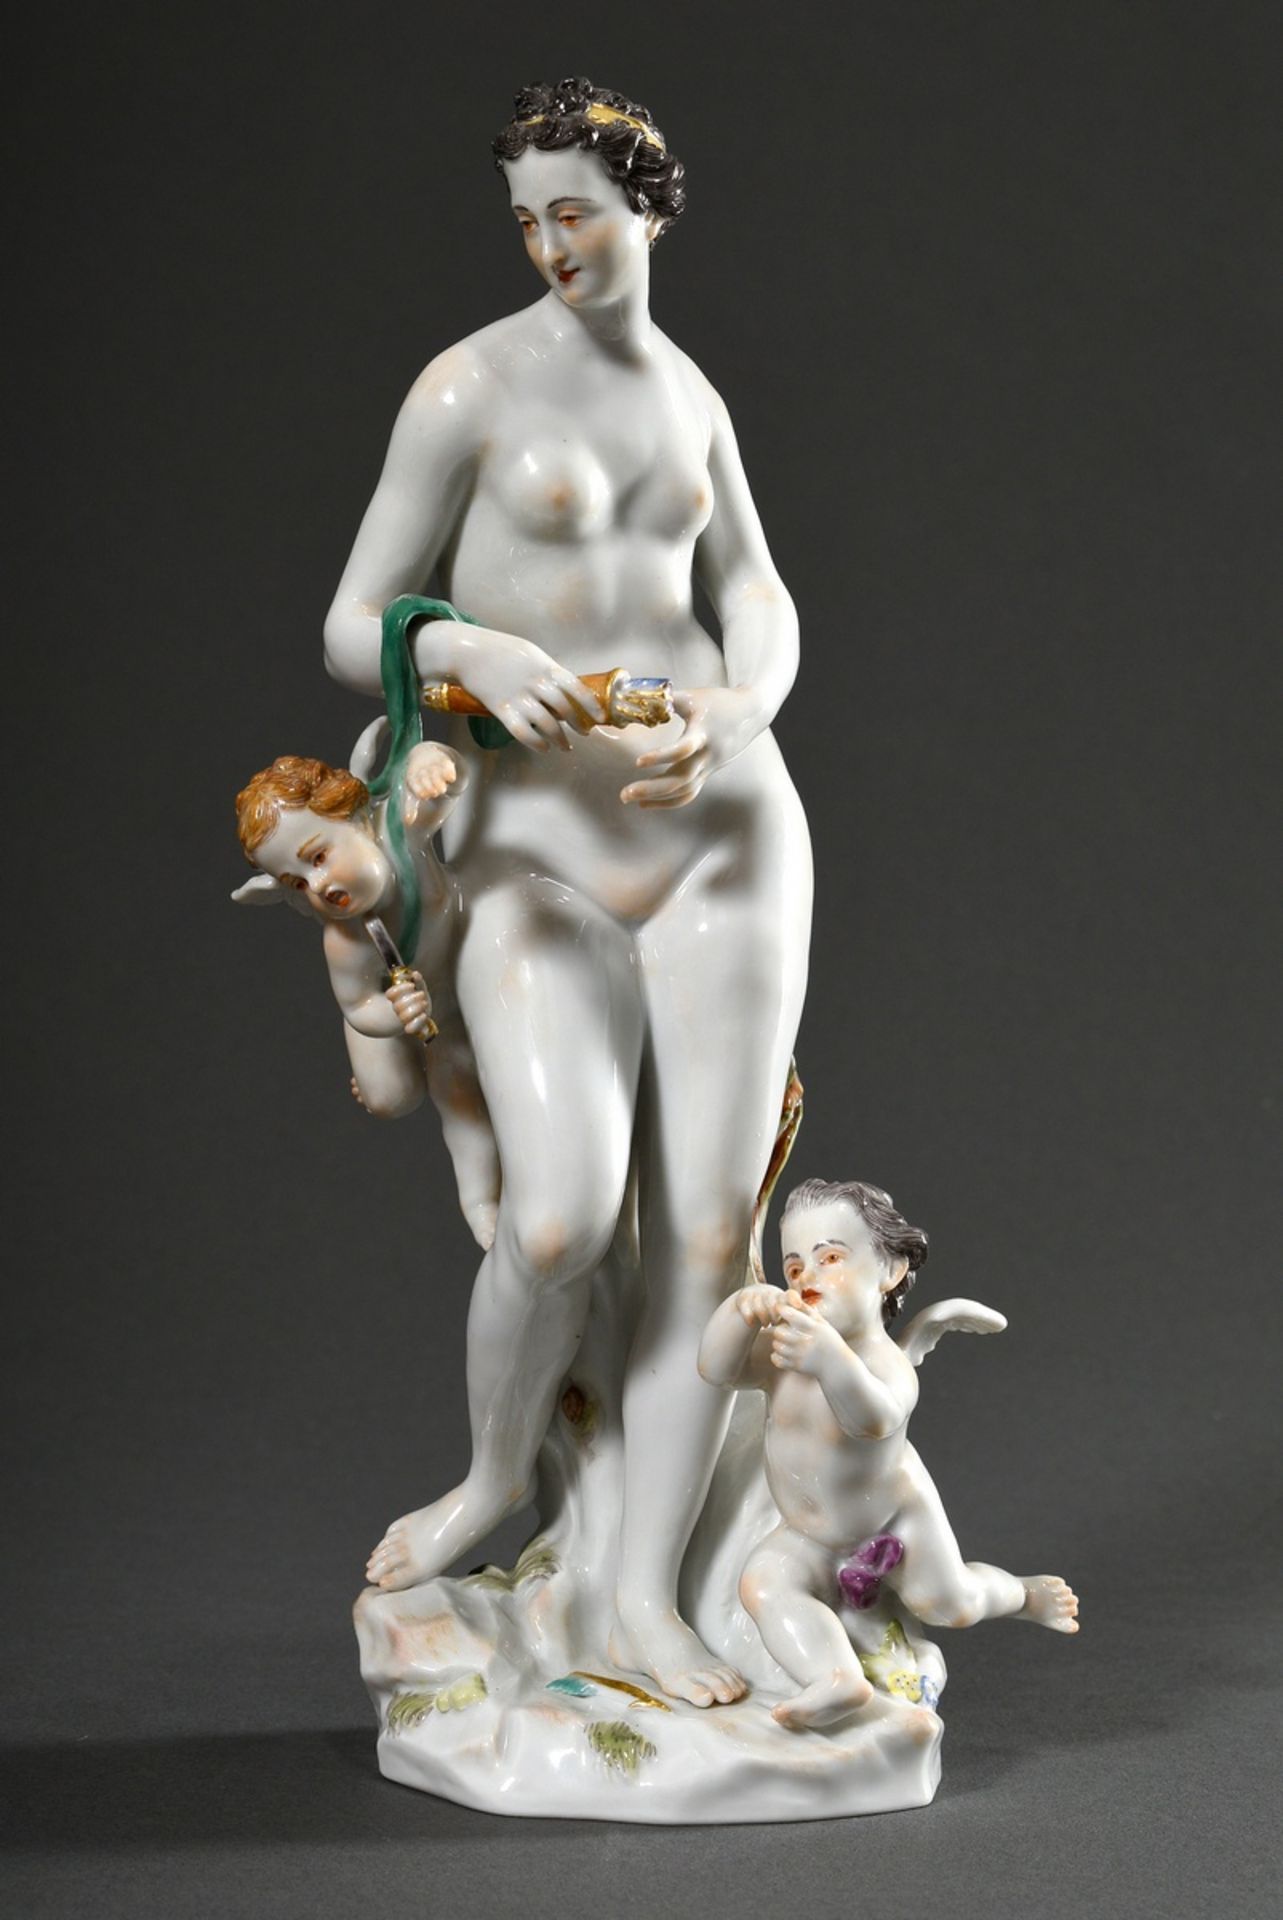 Meissen figurine "Venus with Cupids", model by Johann Joachim Kaendler 1765, colorfully painted and